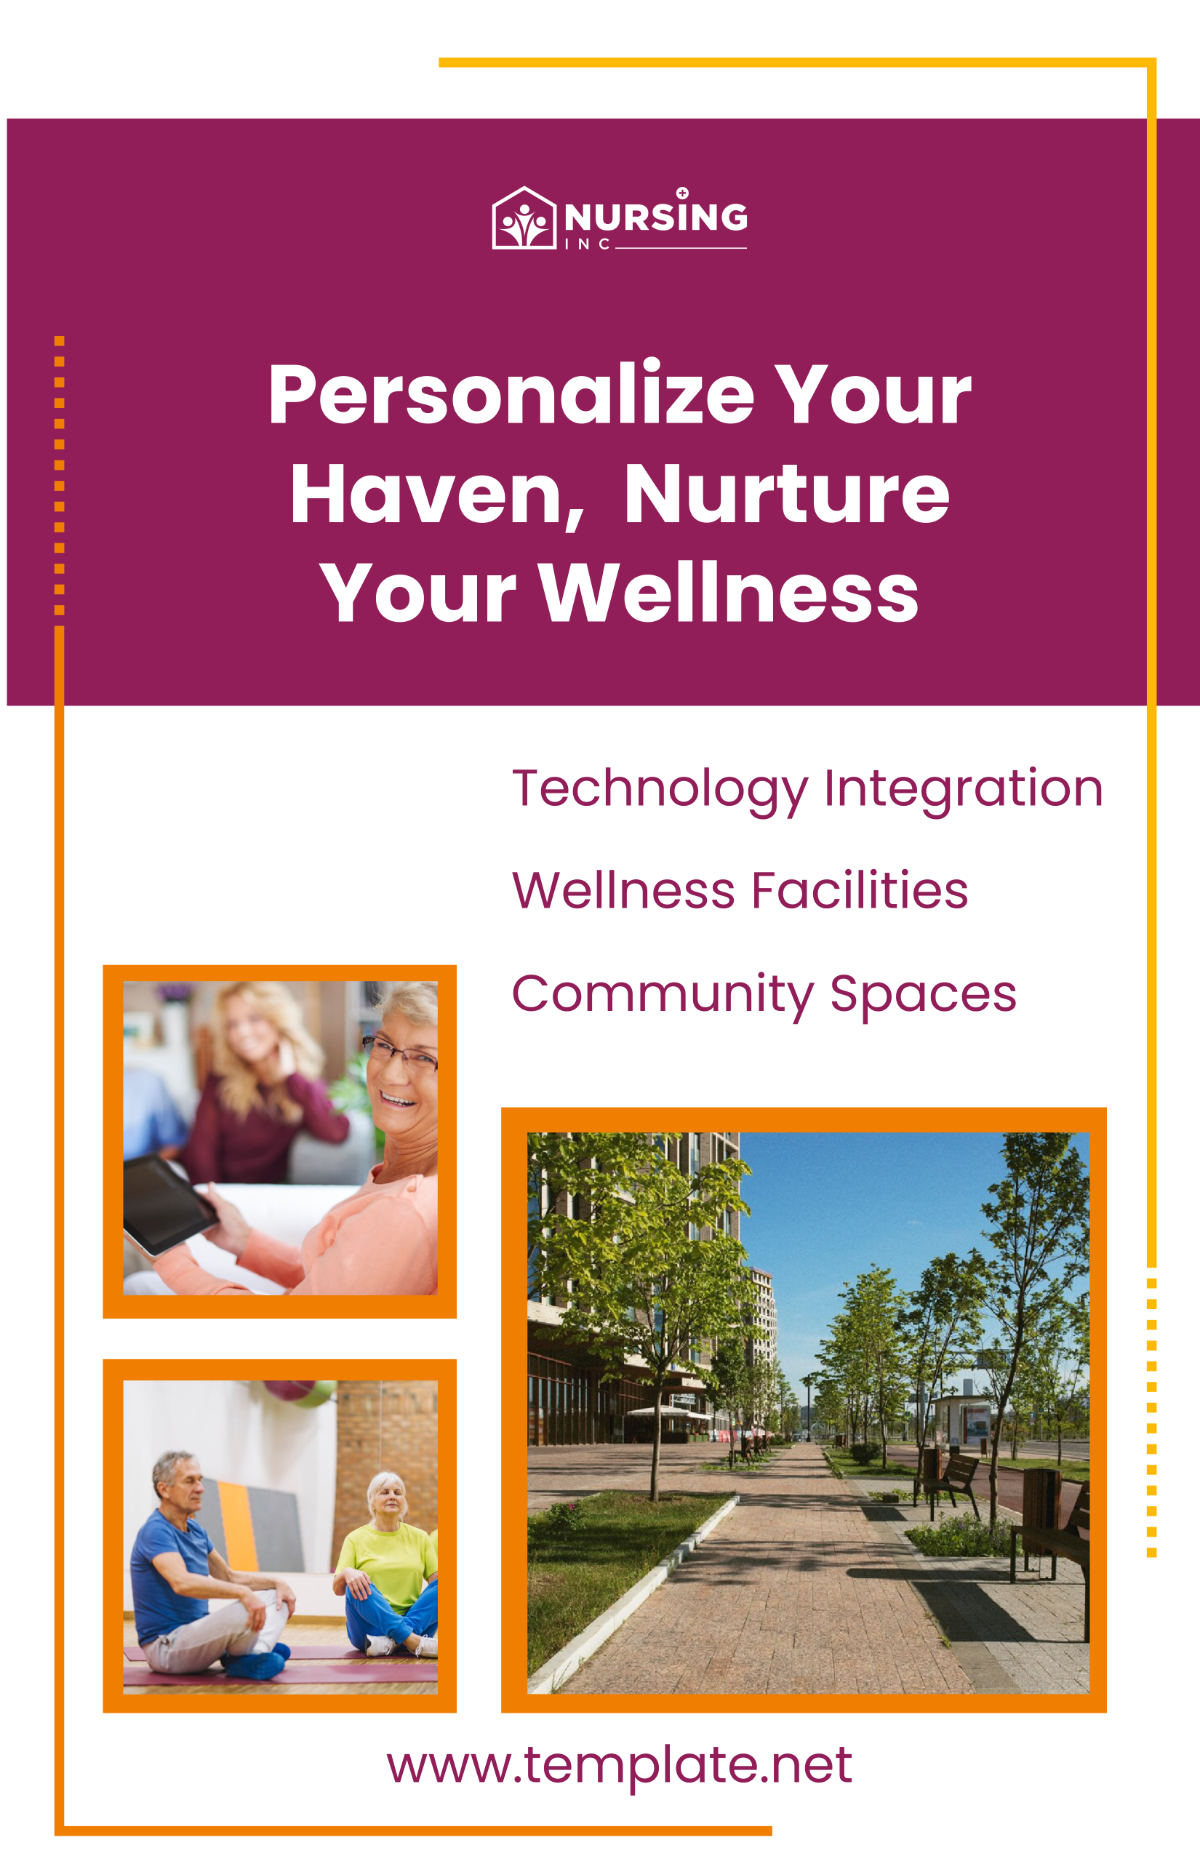 Customize Your Living Space: Options and Amenities Flyer